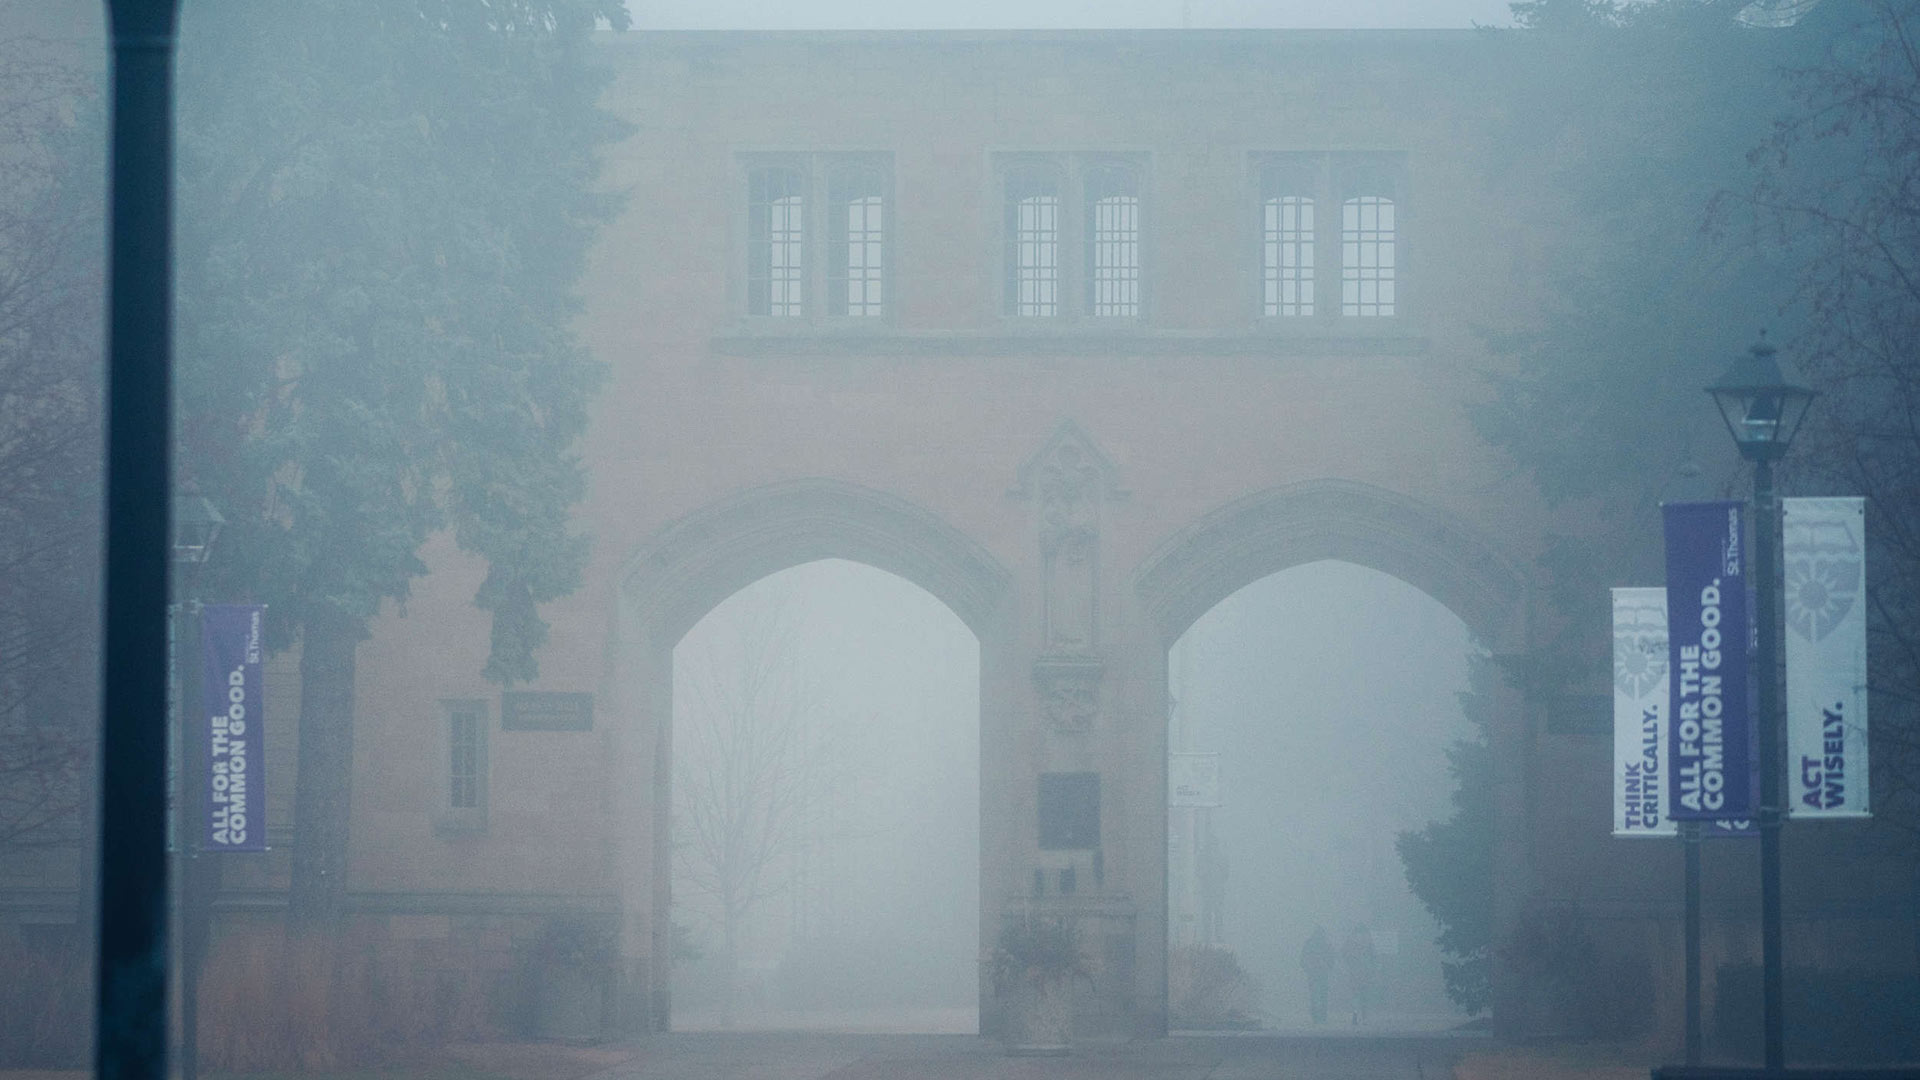 The St. Thomas arches in fog